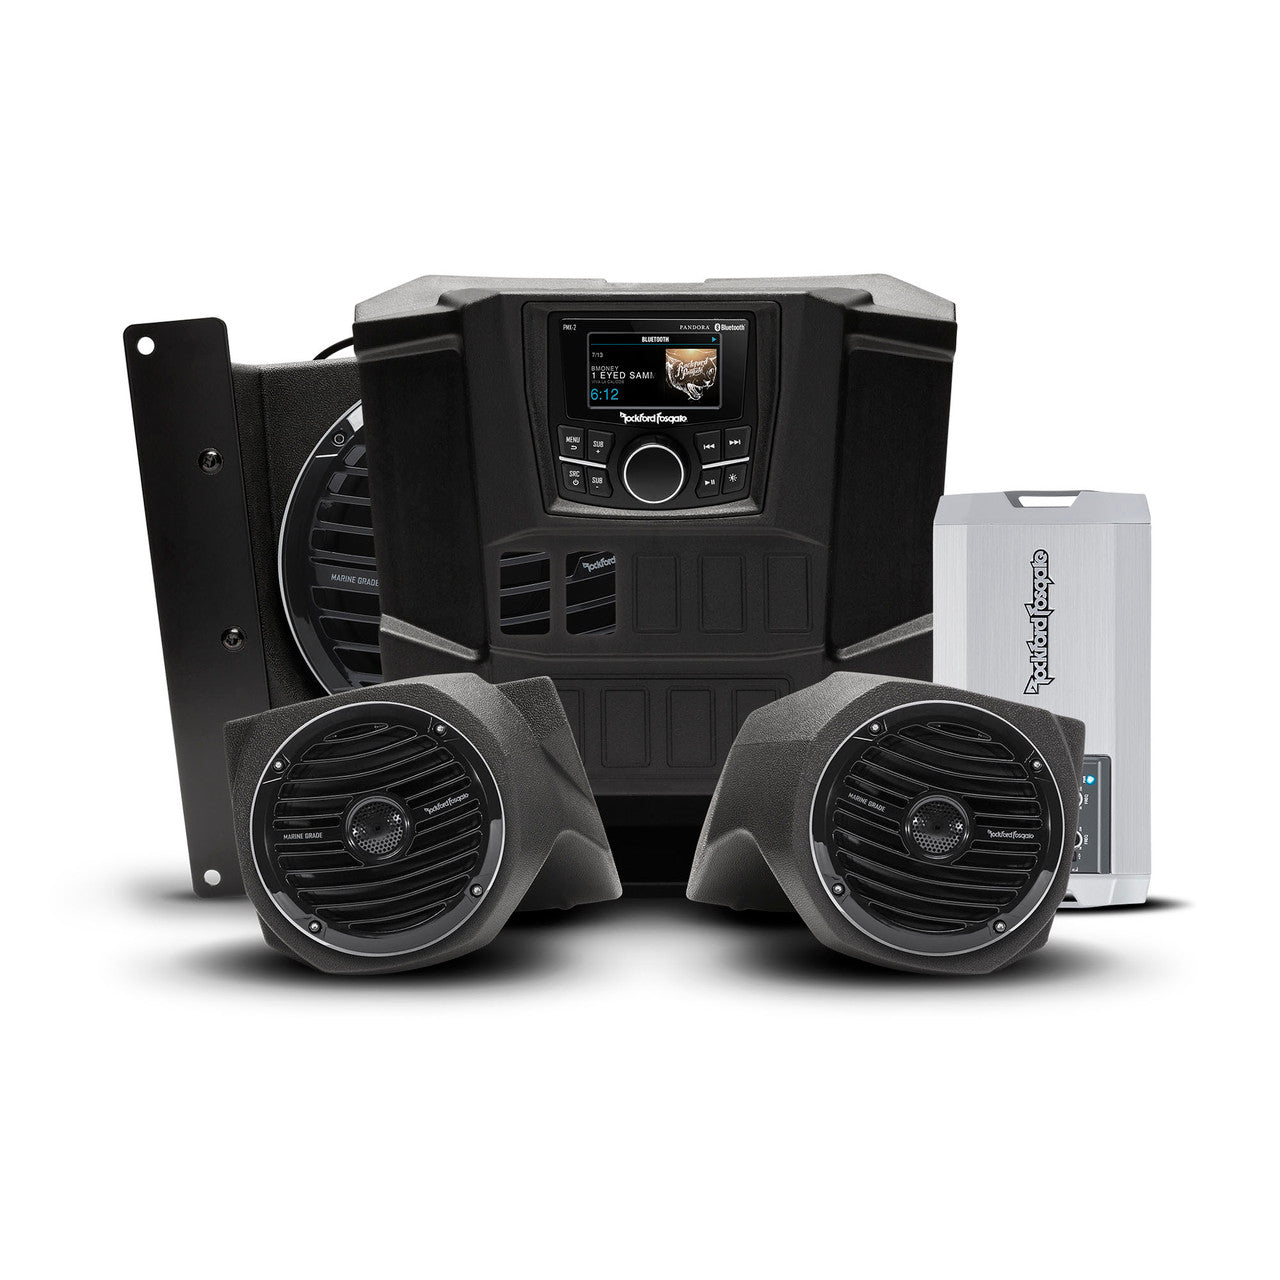 Rockford Fosgate RNGR-STAGE3 400 Watt Stereo, Front Speaker, And Subwoofer Kit Compatible With Select Ranger Models